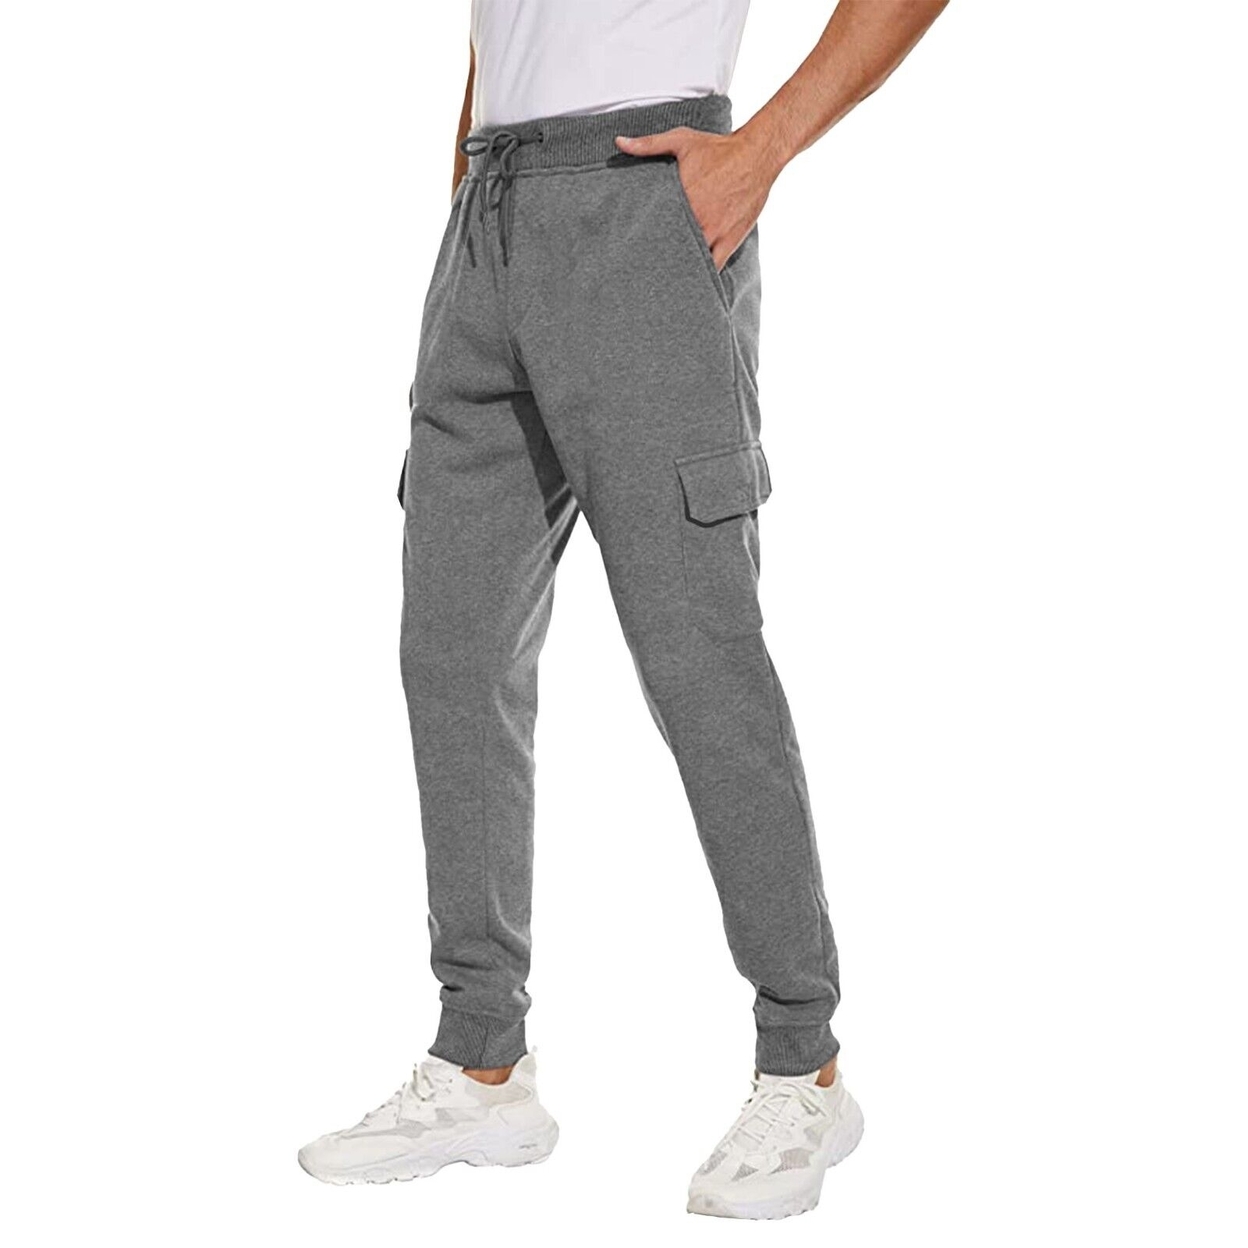 Men's Ultra Soft Winter Warm Thick Sweat Pant Athletic Sherpa Lined Jogger Pants - Grey, Large